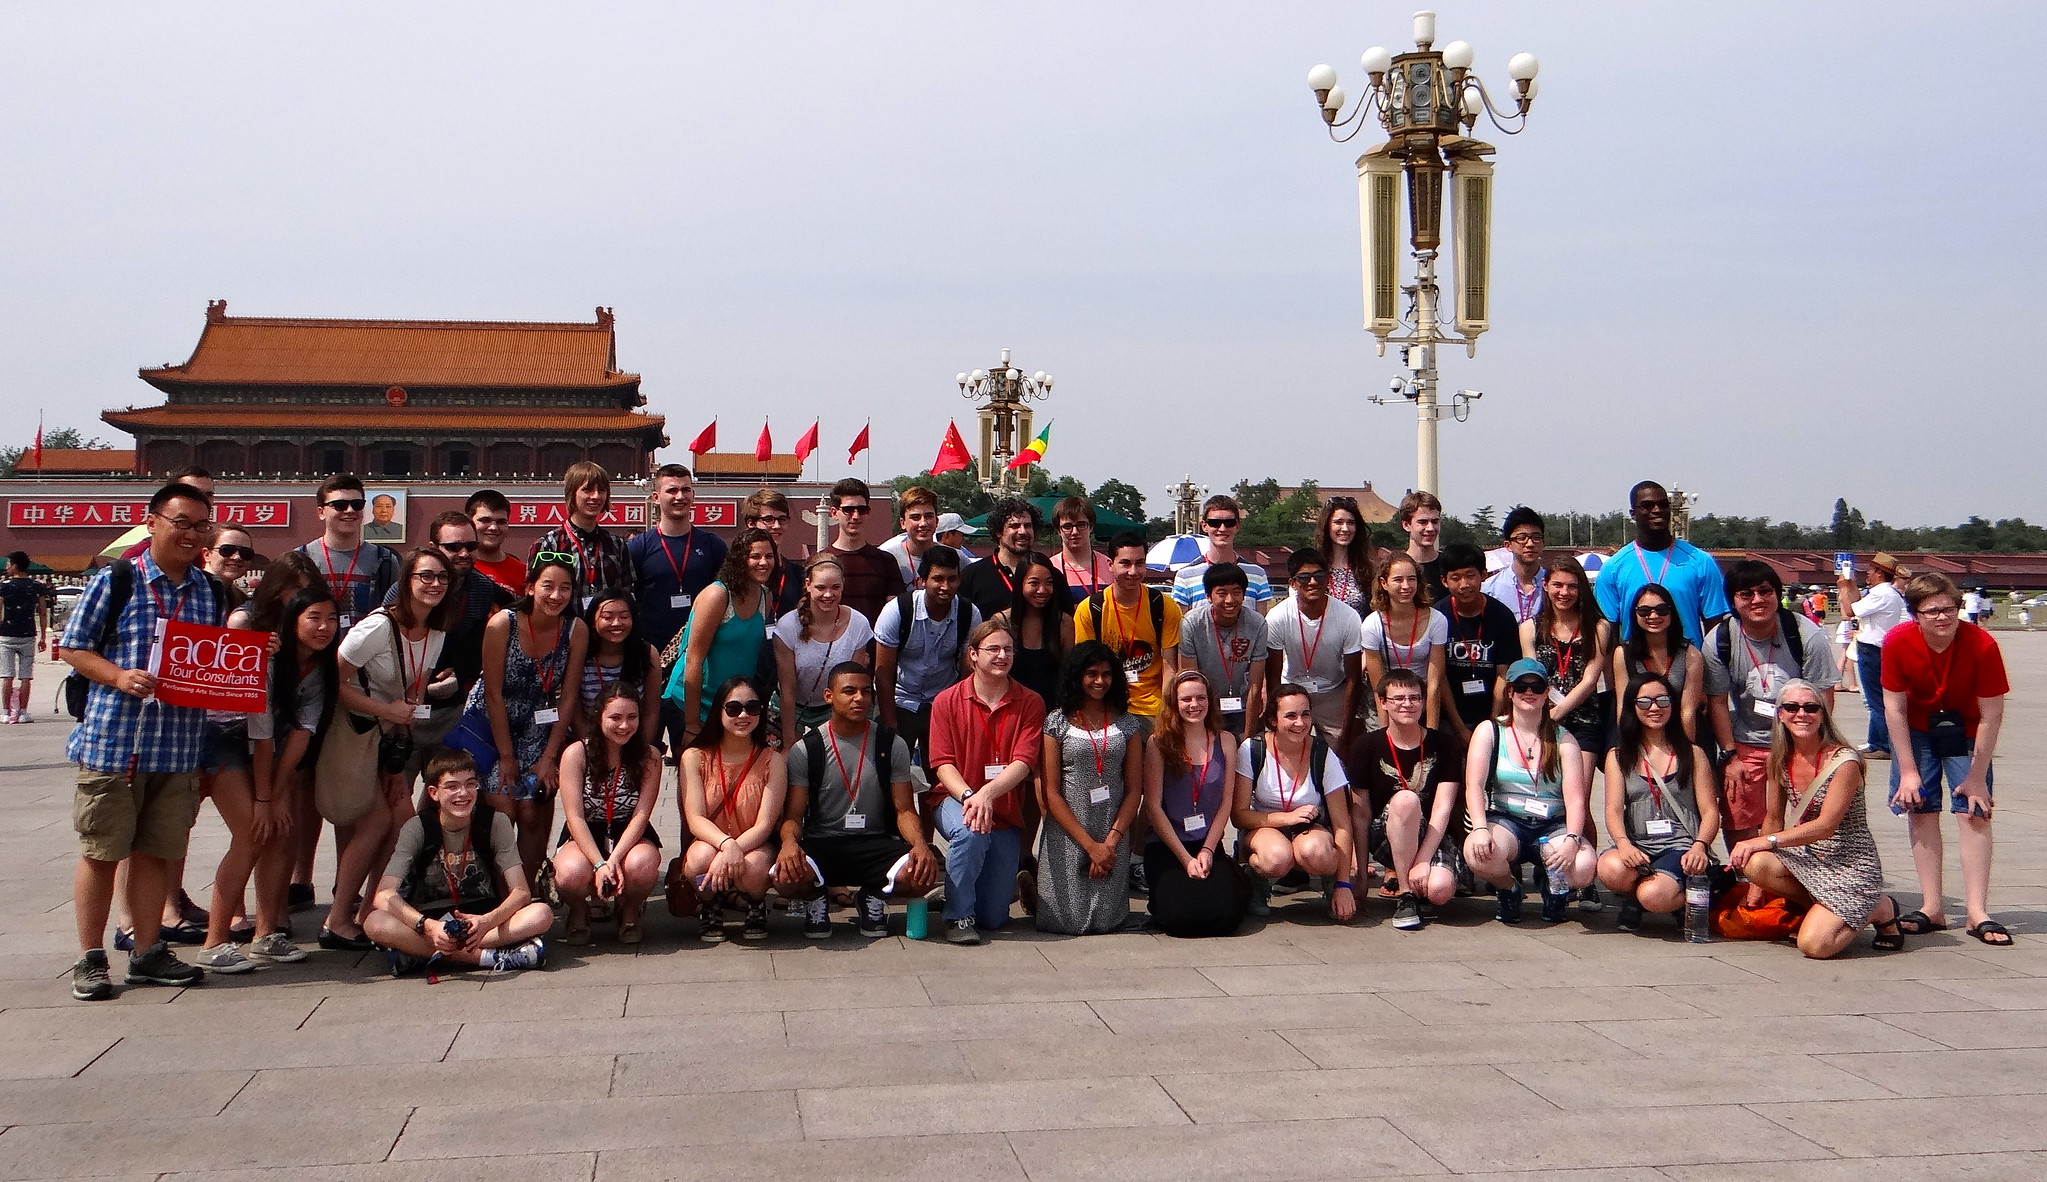 The Students (& Tour Guide, Terry) Pose in Front of Tiananmen Square